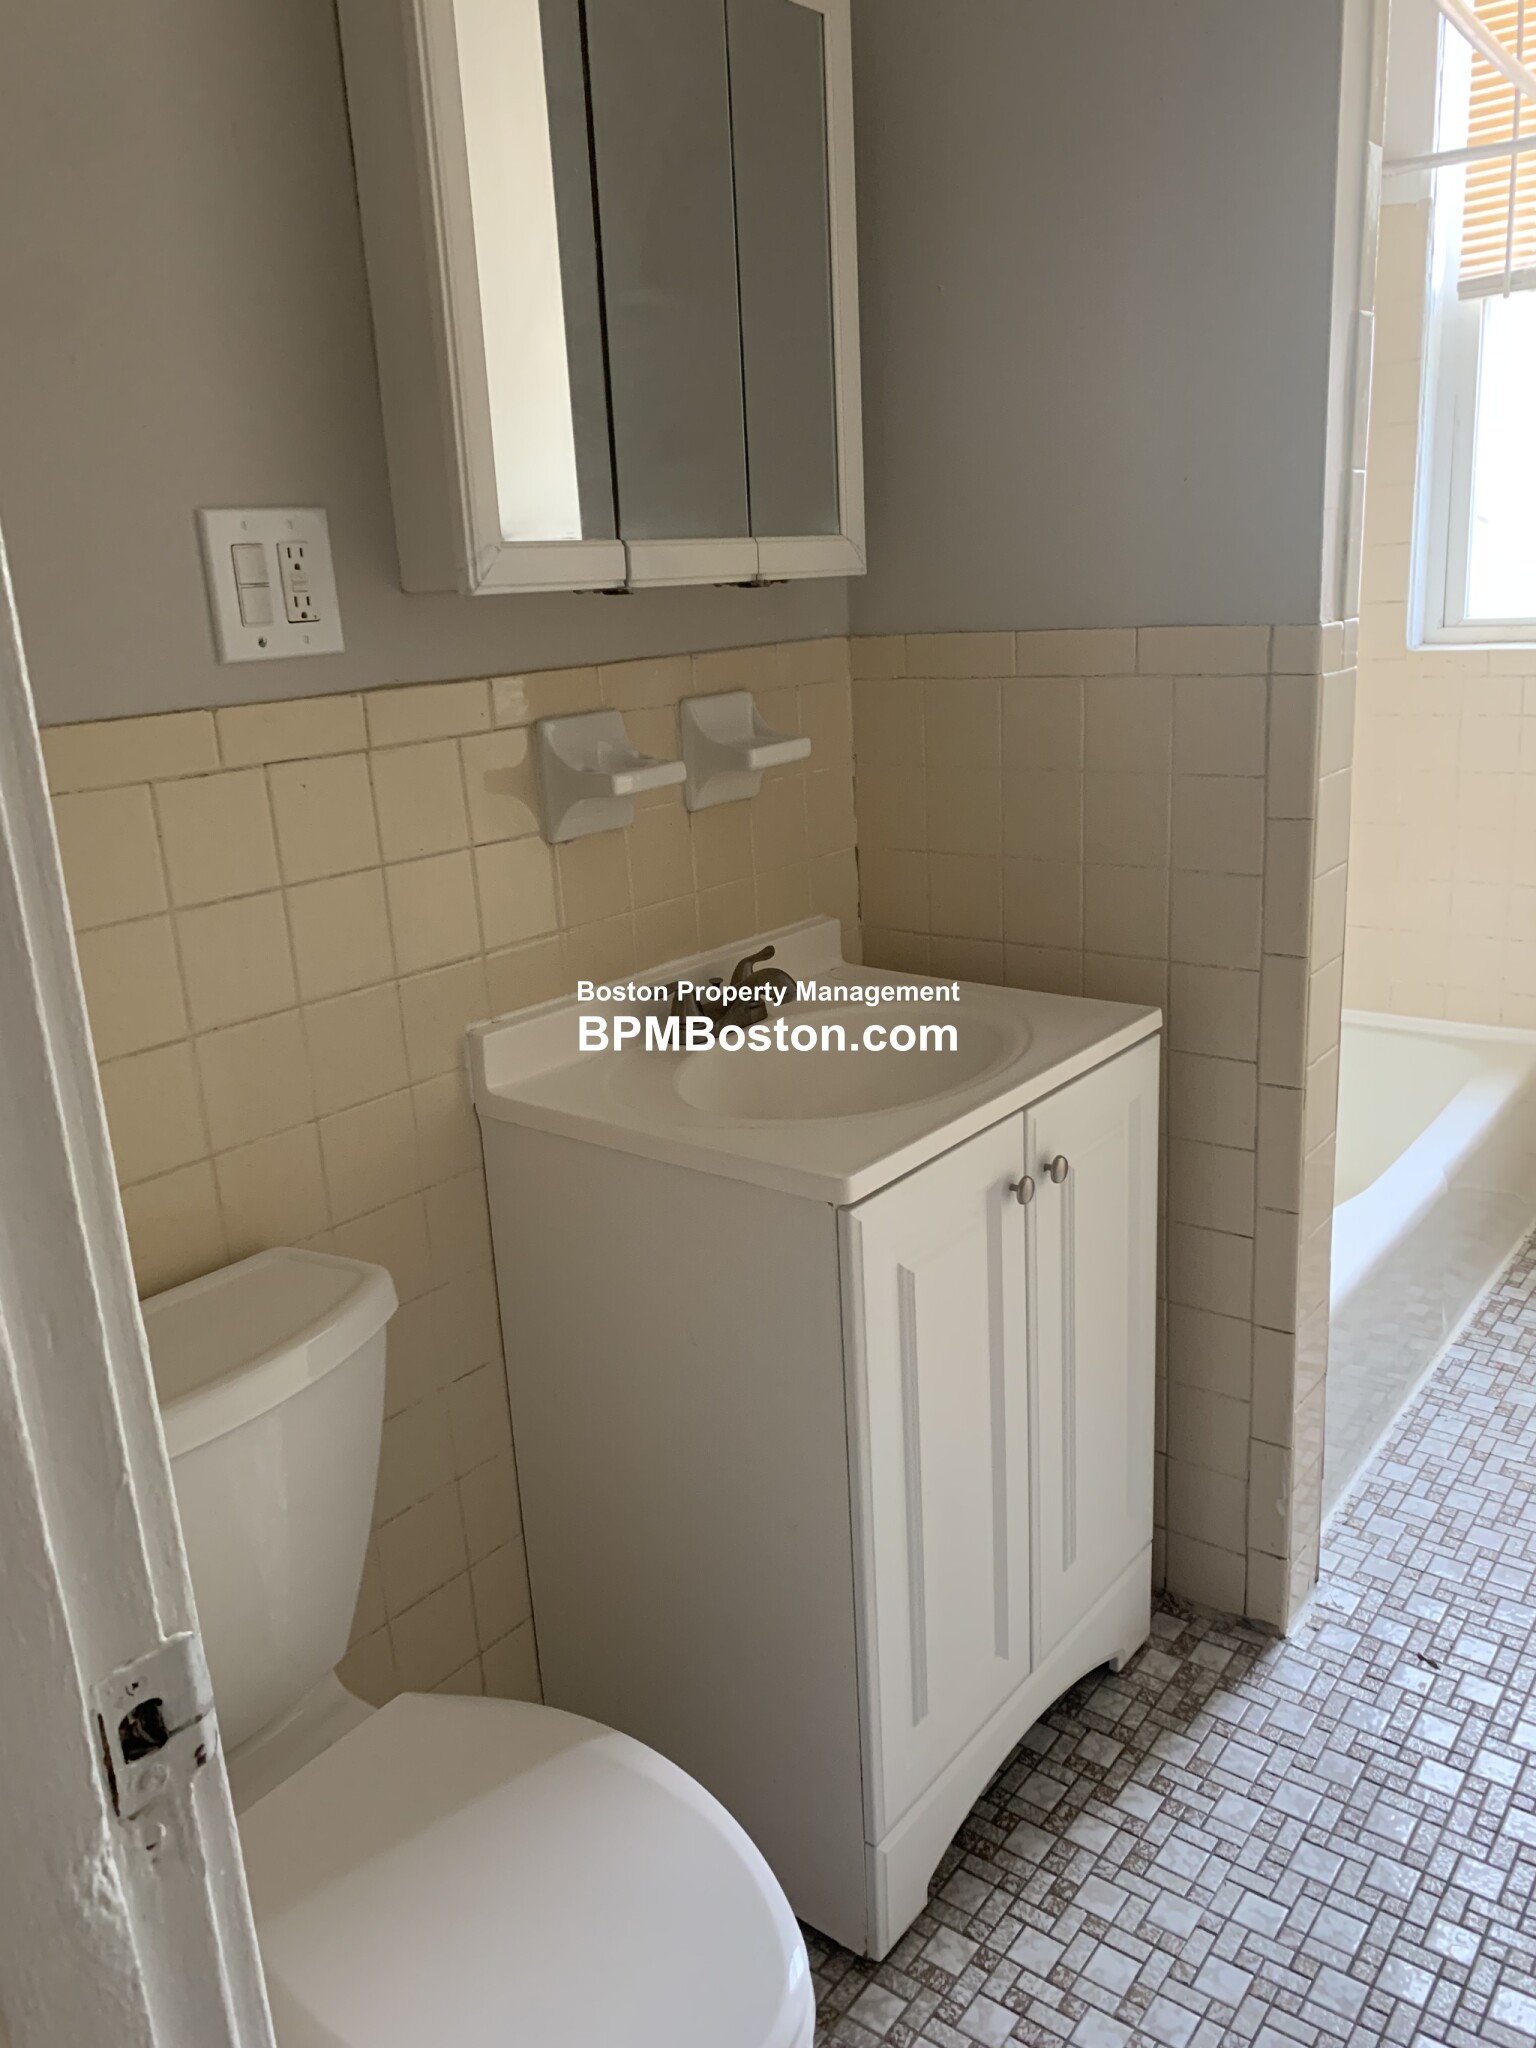 Photos of apartment on Medford St.,Chelsea MA 02150